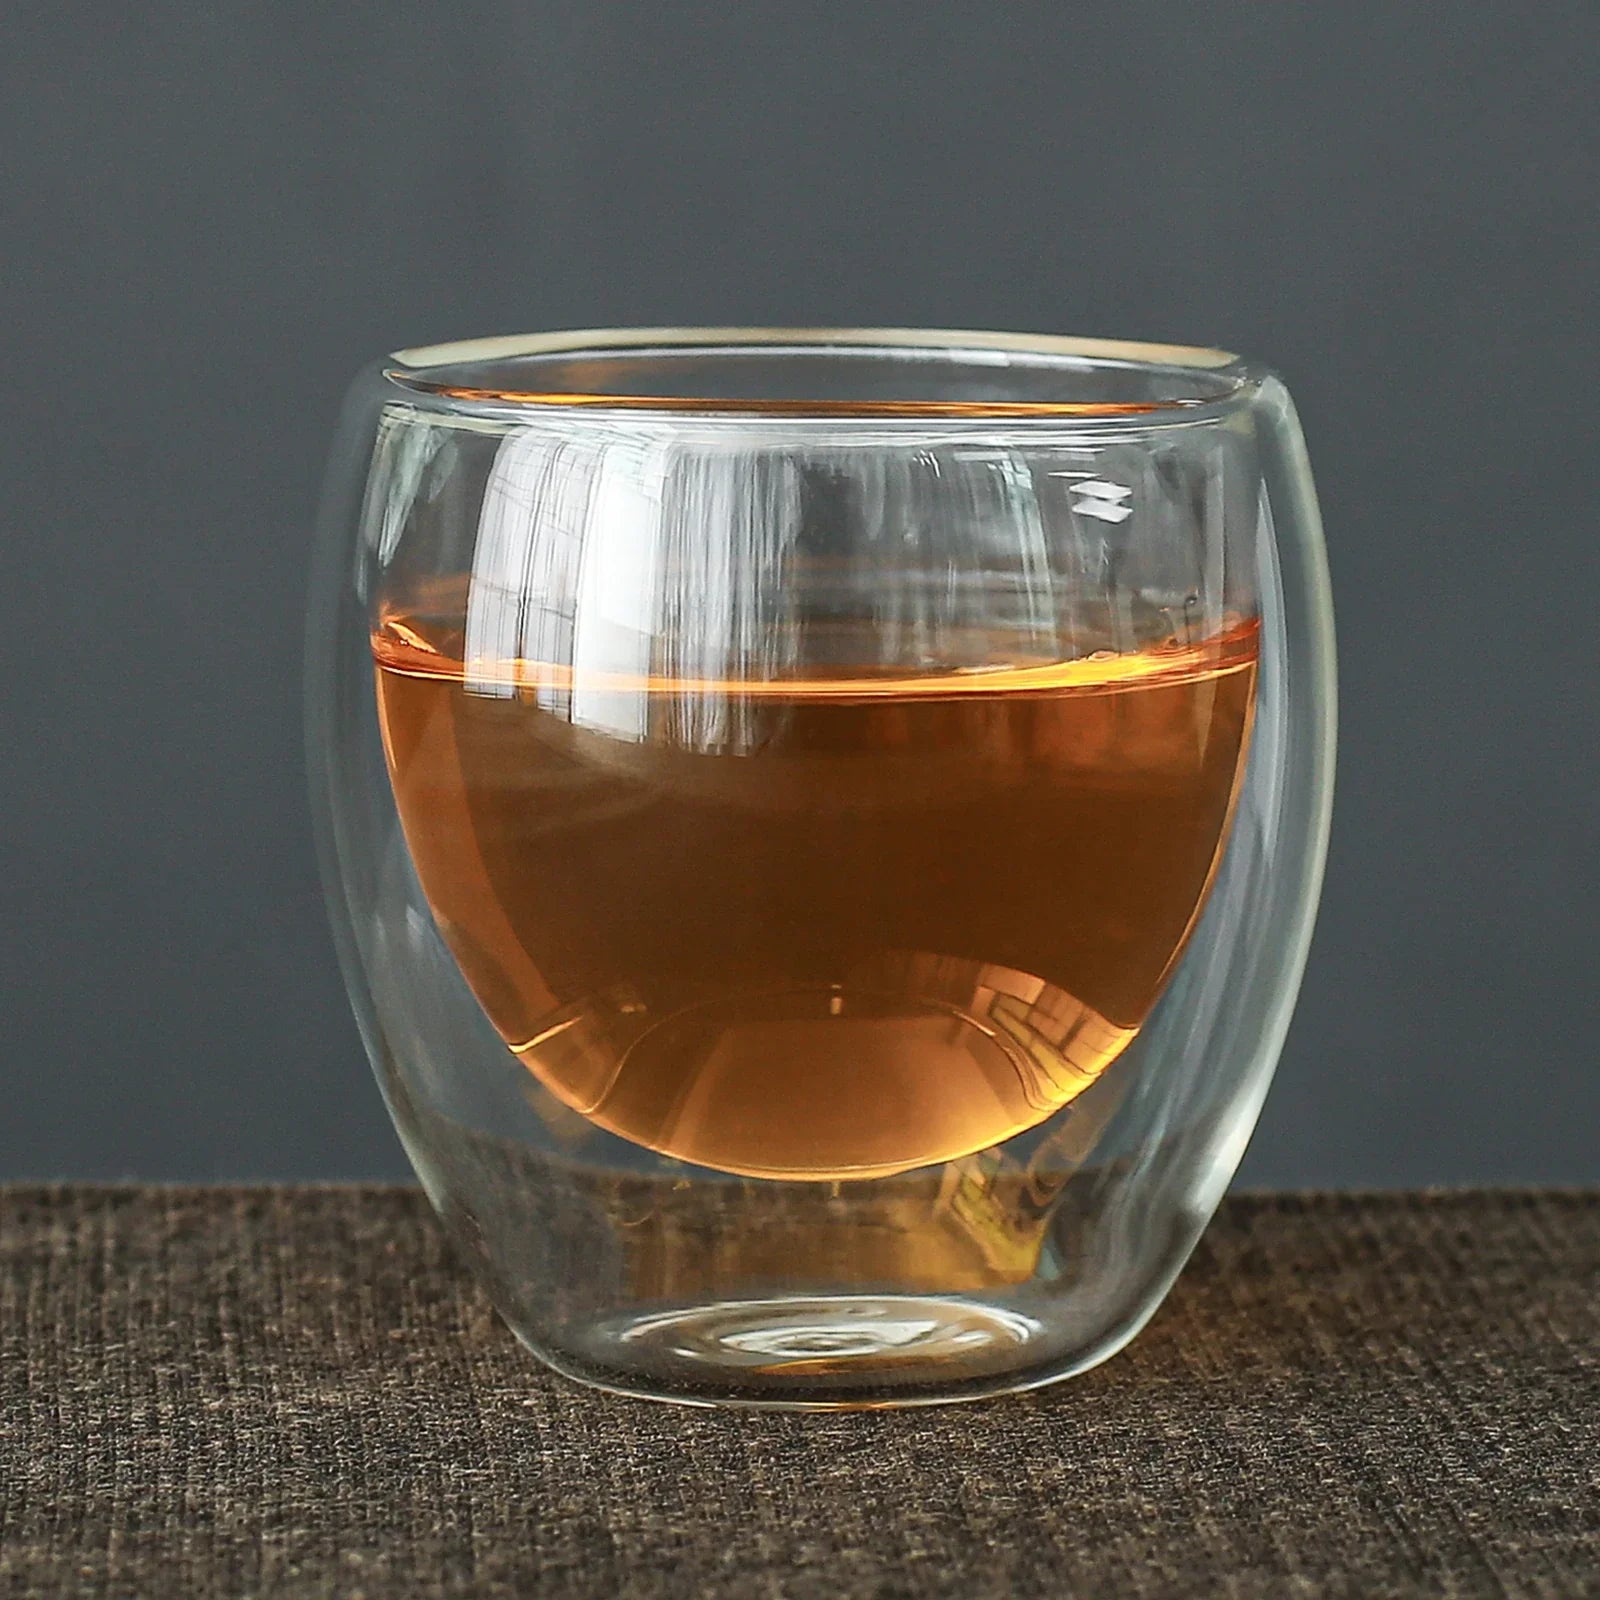 Double Wall Insulated and Anti-scalding Glass Tea Cup 75ml | TEANAGOO